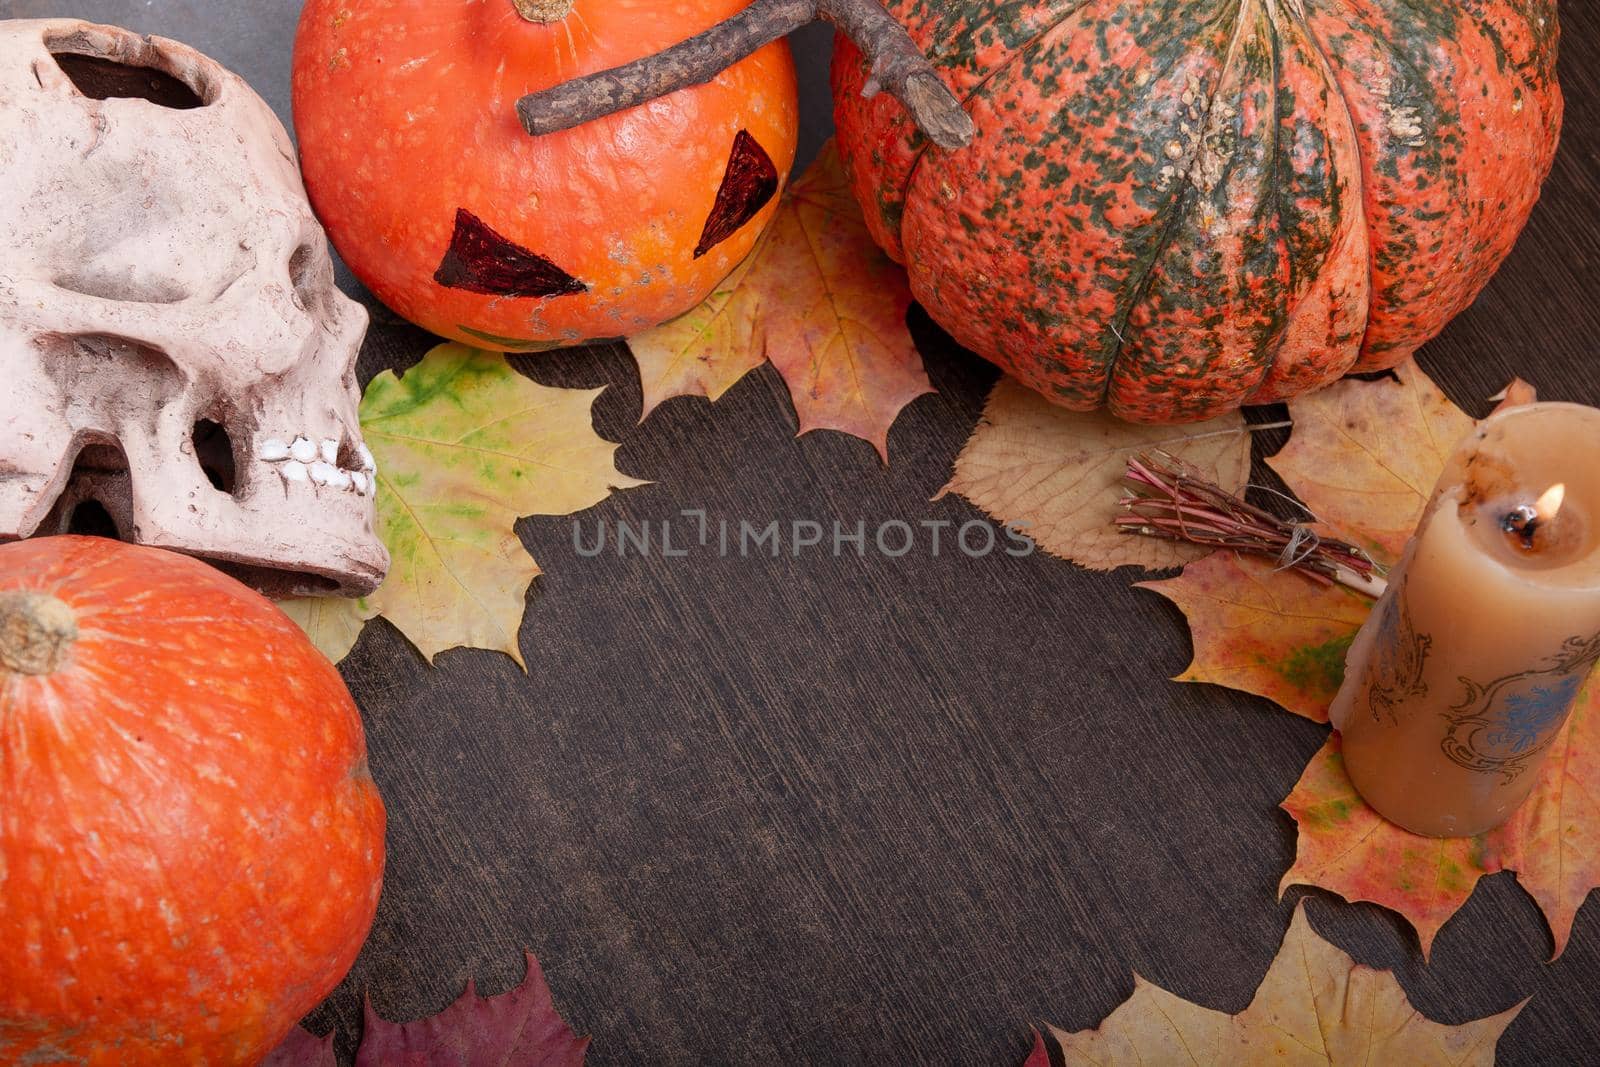 ceramic skull, candle, halloween pumpkins on a dark brown table background, autumn leaves and cones, copy space, top view